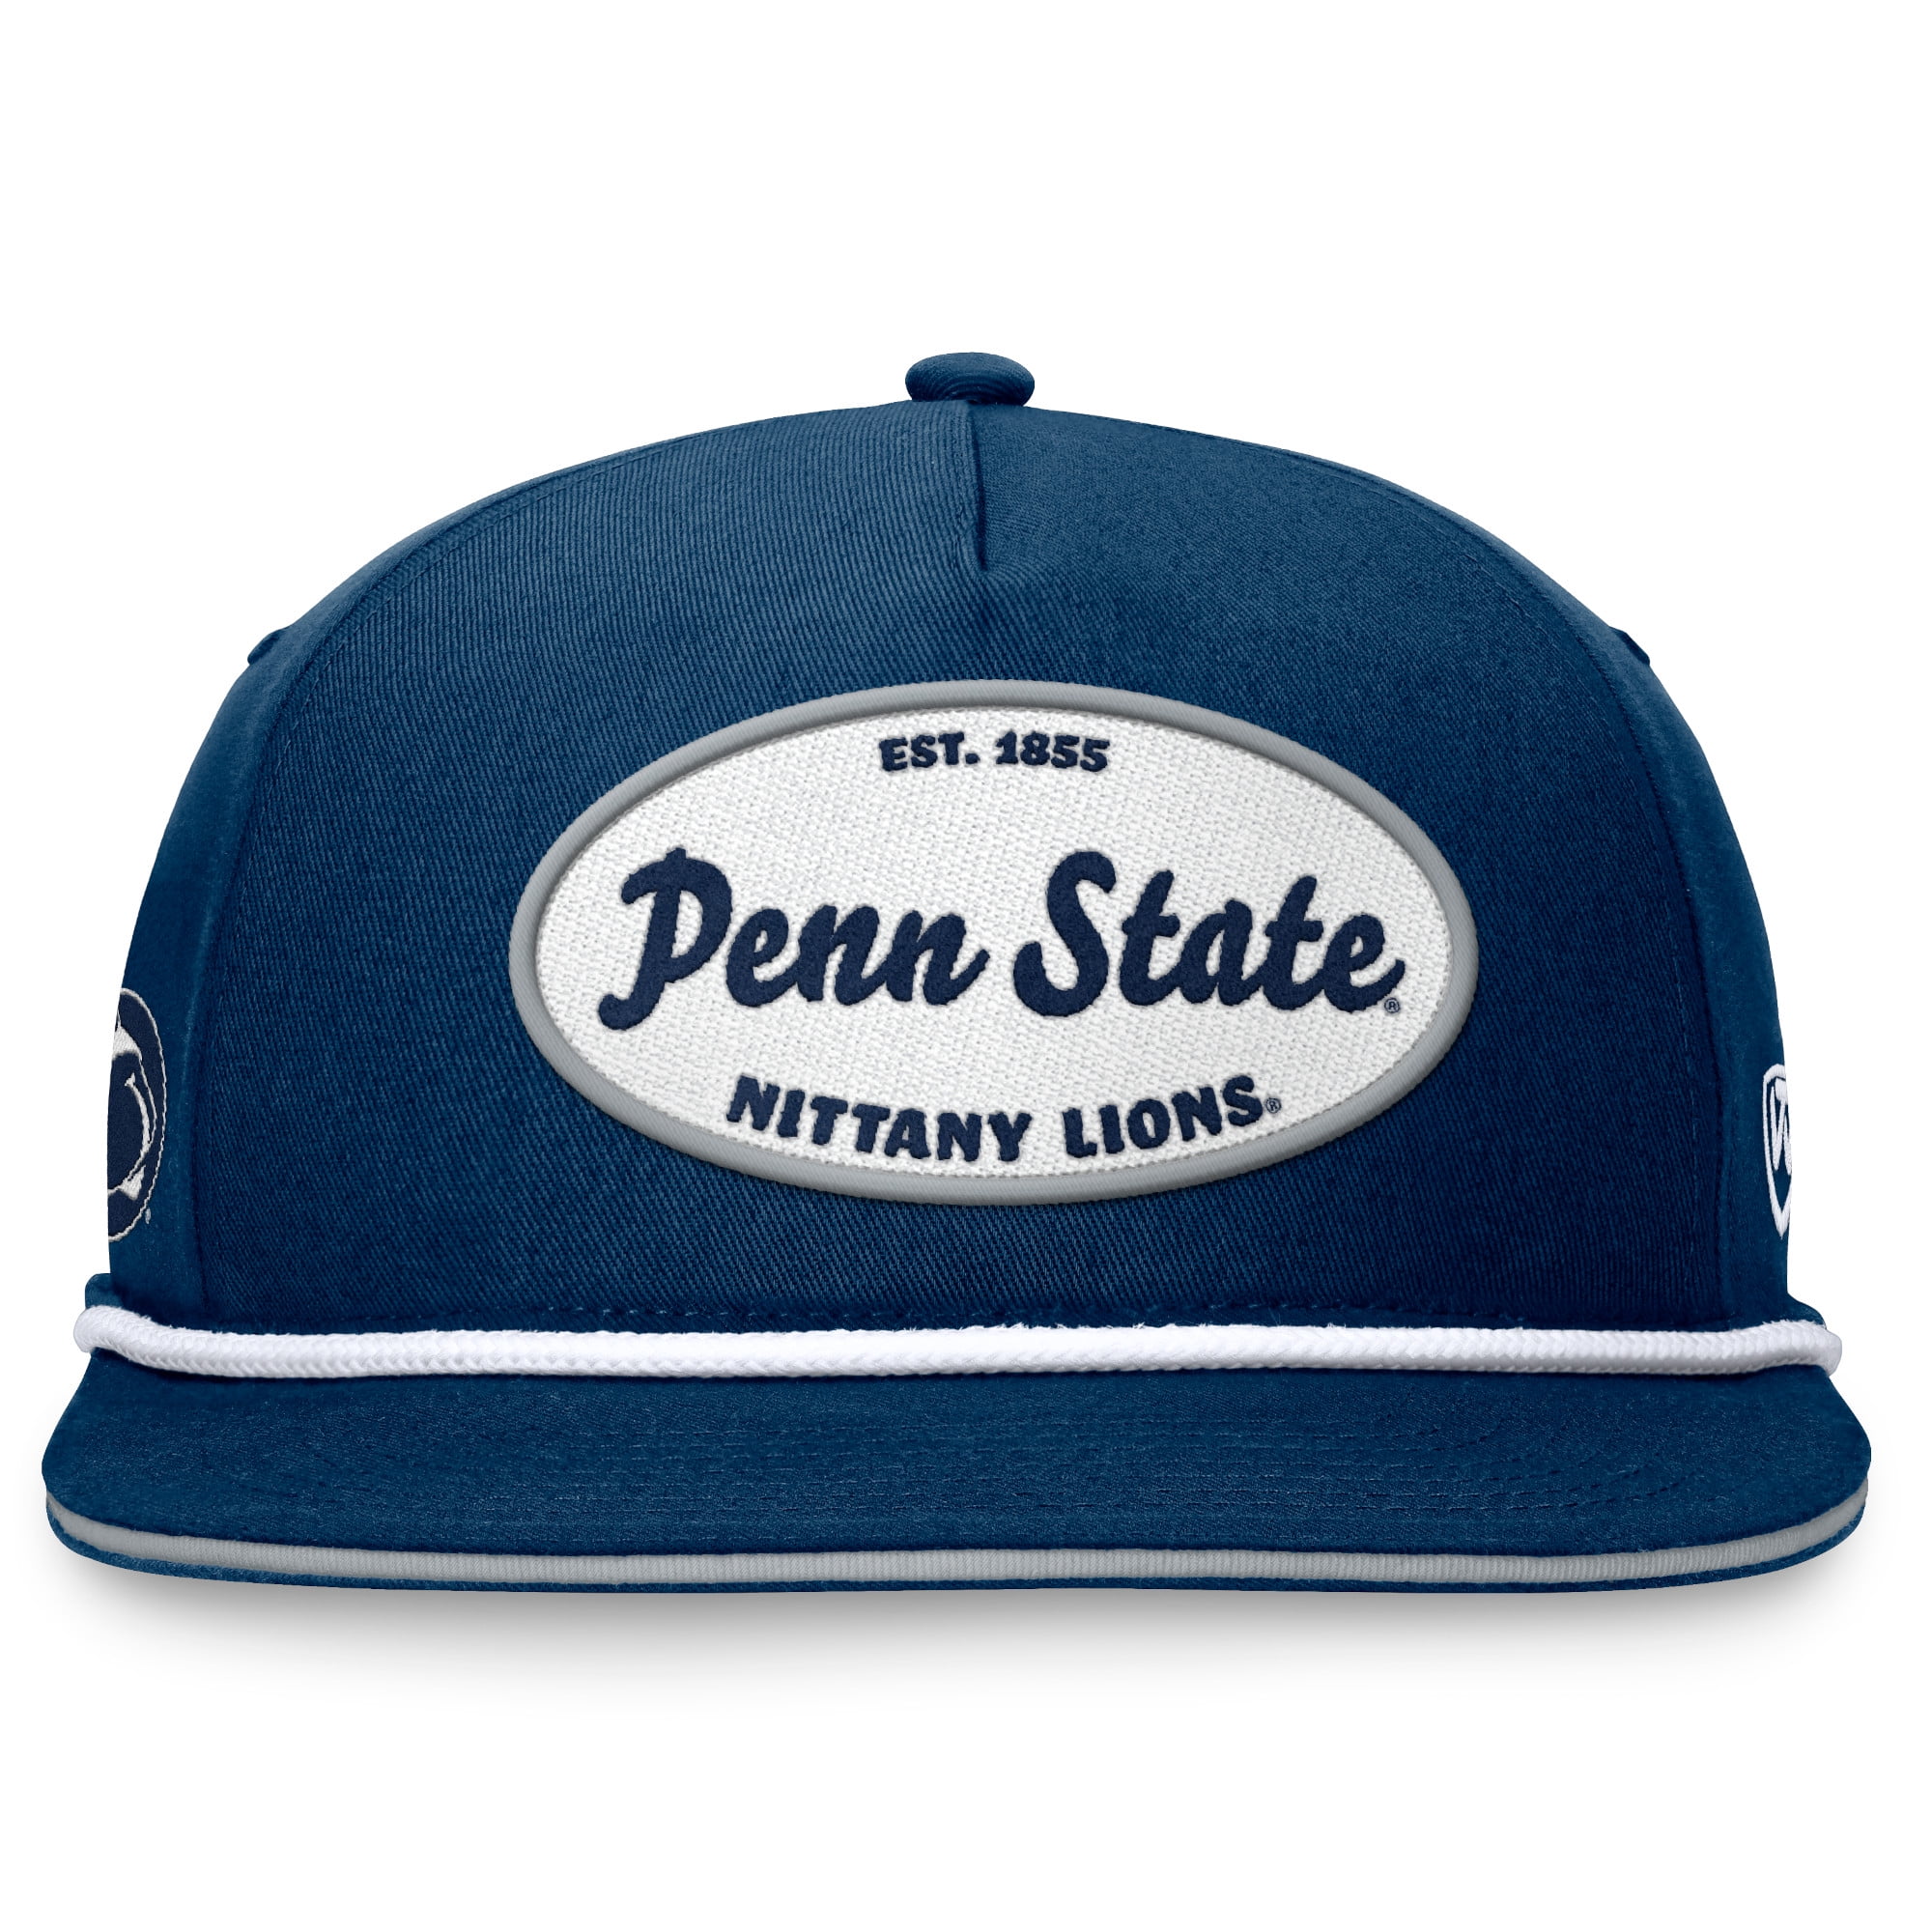 Penn State Nittany Lions Navy and White Trucker Hat